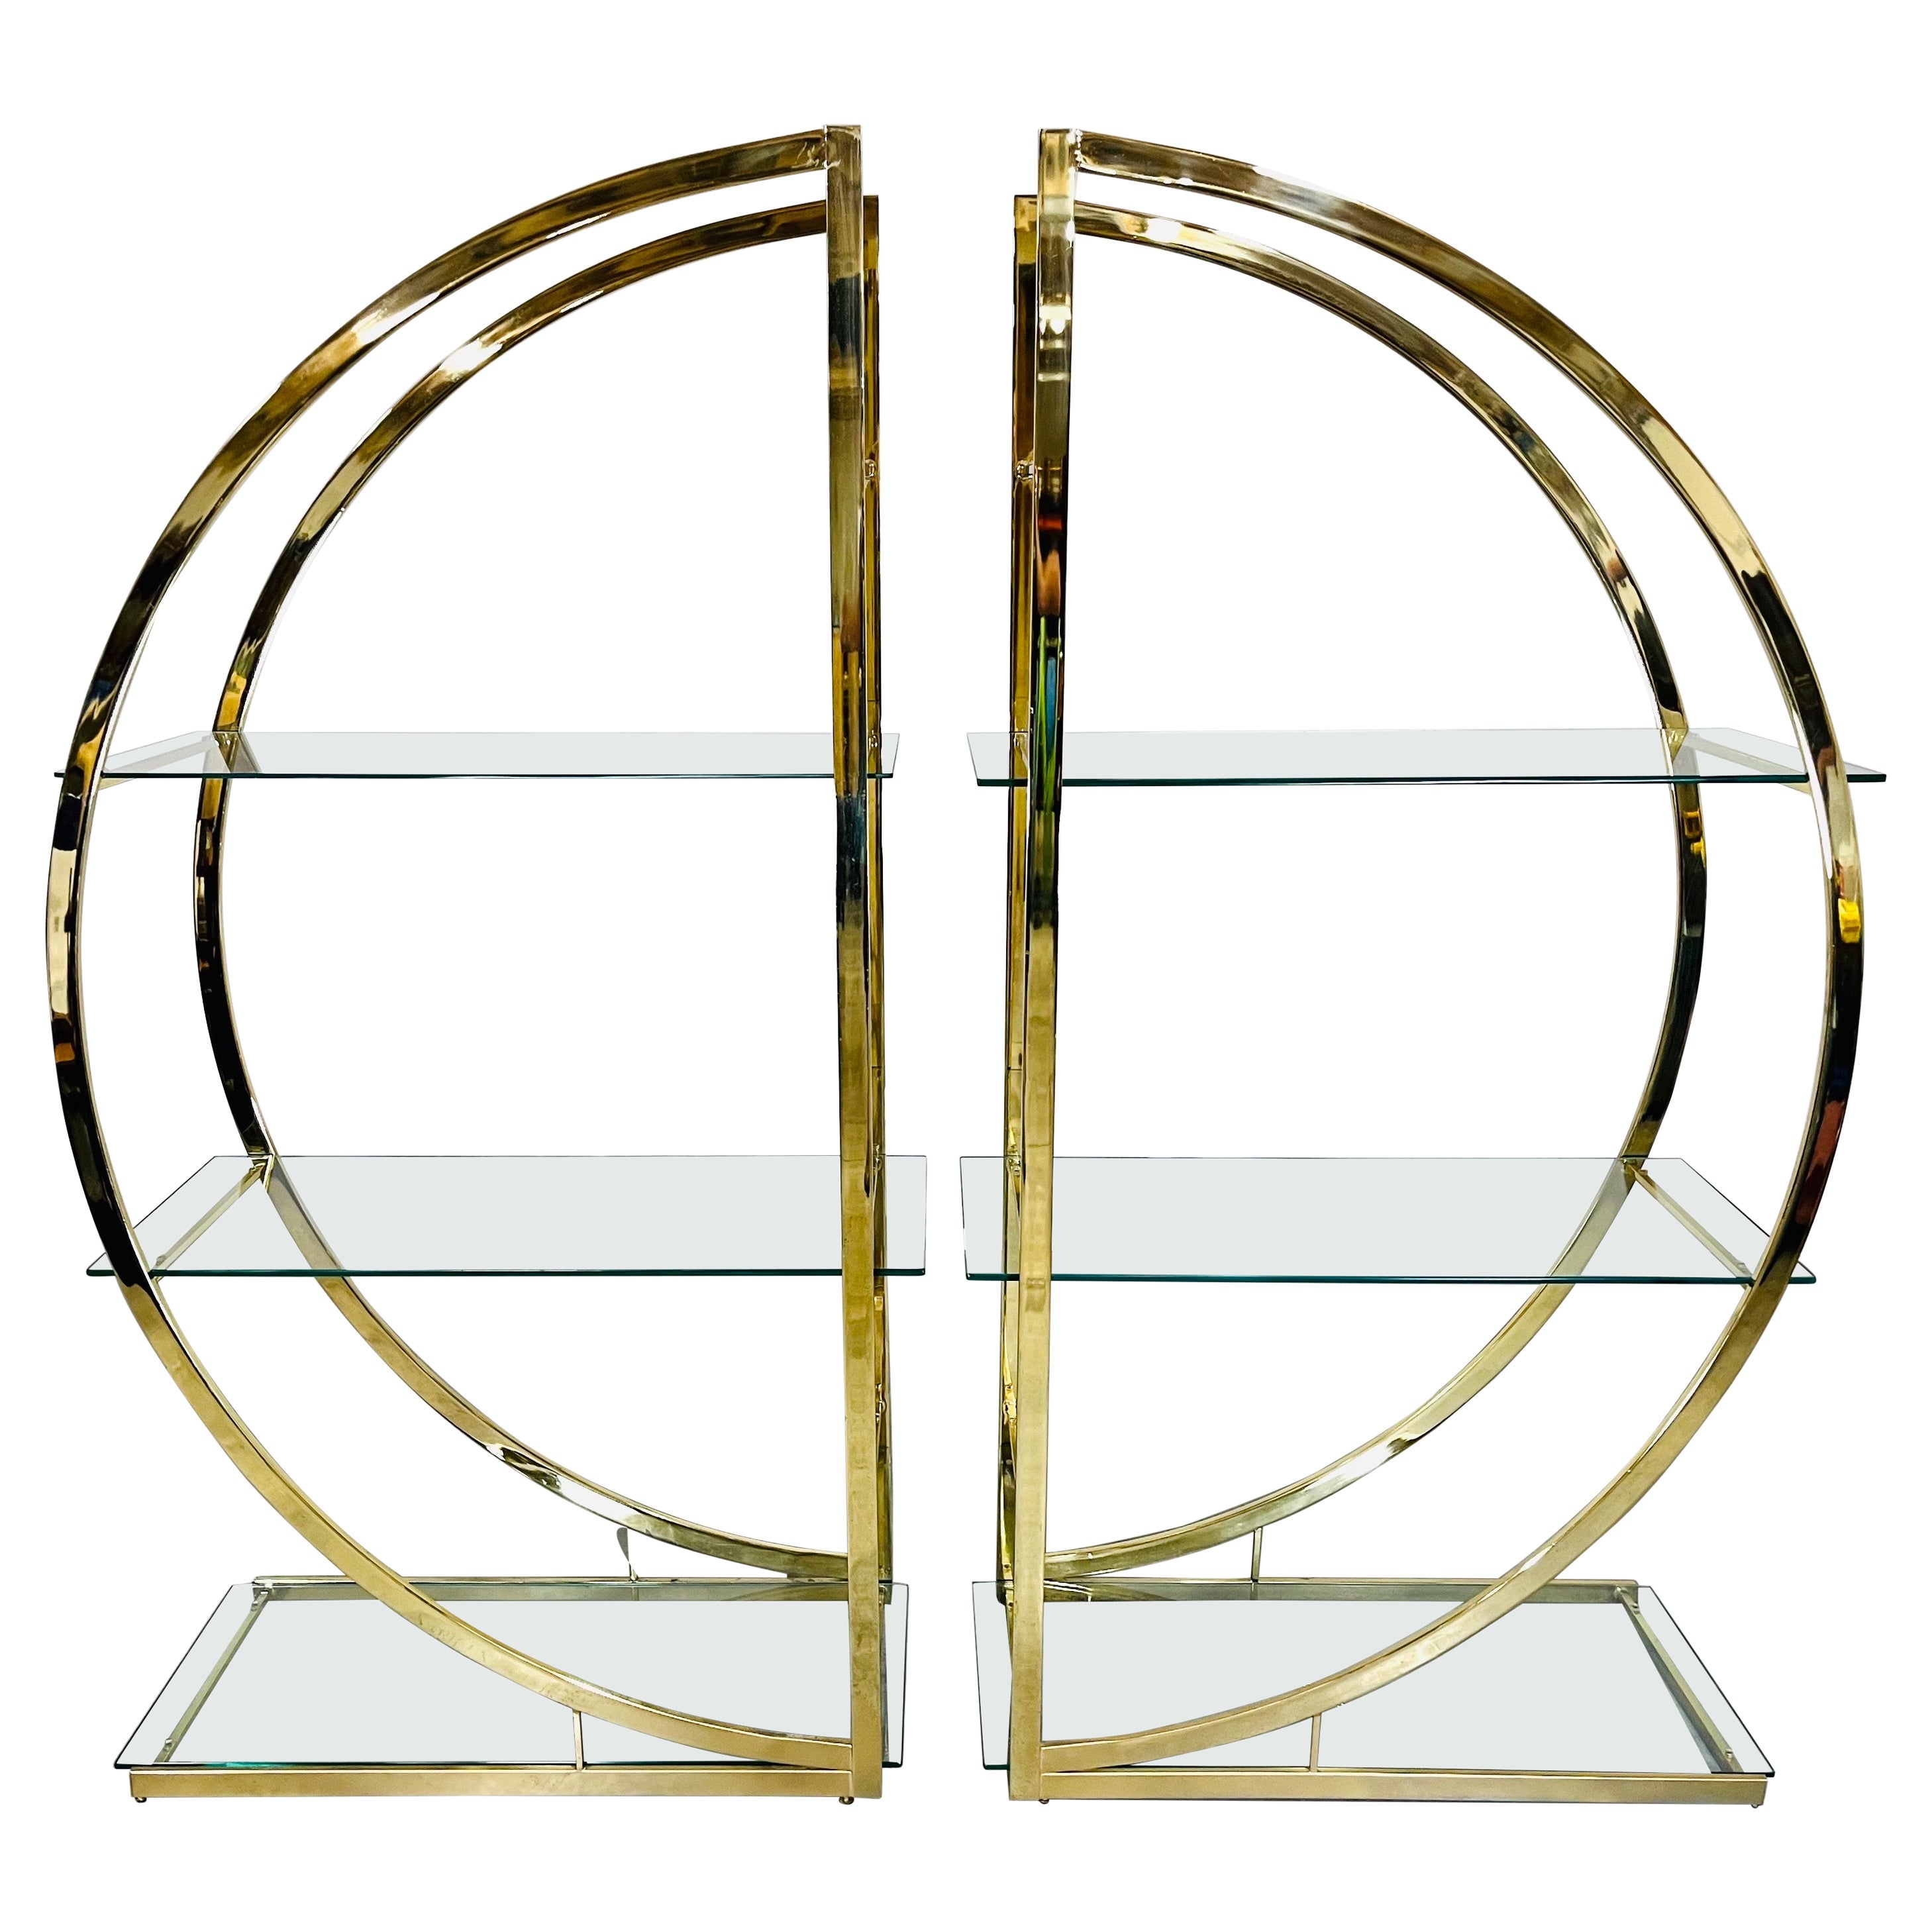 An elegant double half circle brass etagere having 6 tempered glass shelves with an additional 2 tempered glass bridge shelves for a wider setup. 
Manufactured by Design Institute of American in the manner of Milo Baughman. 
United States circa